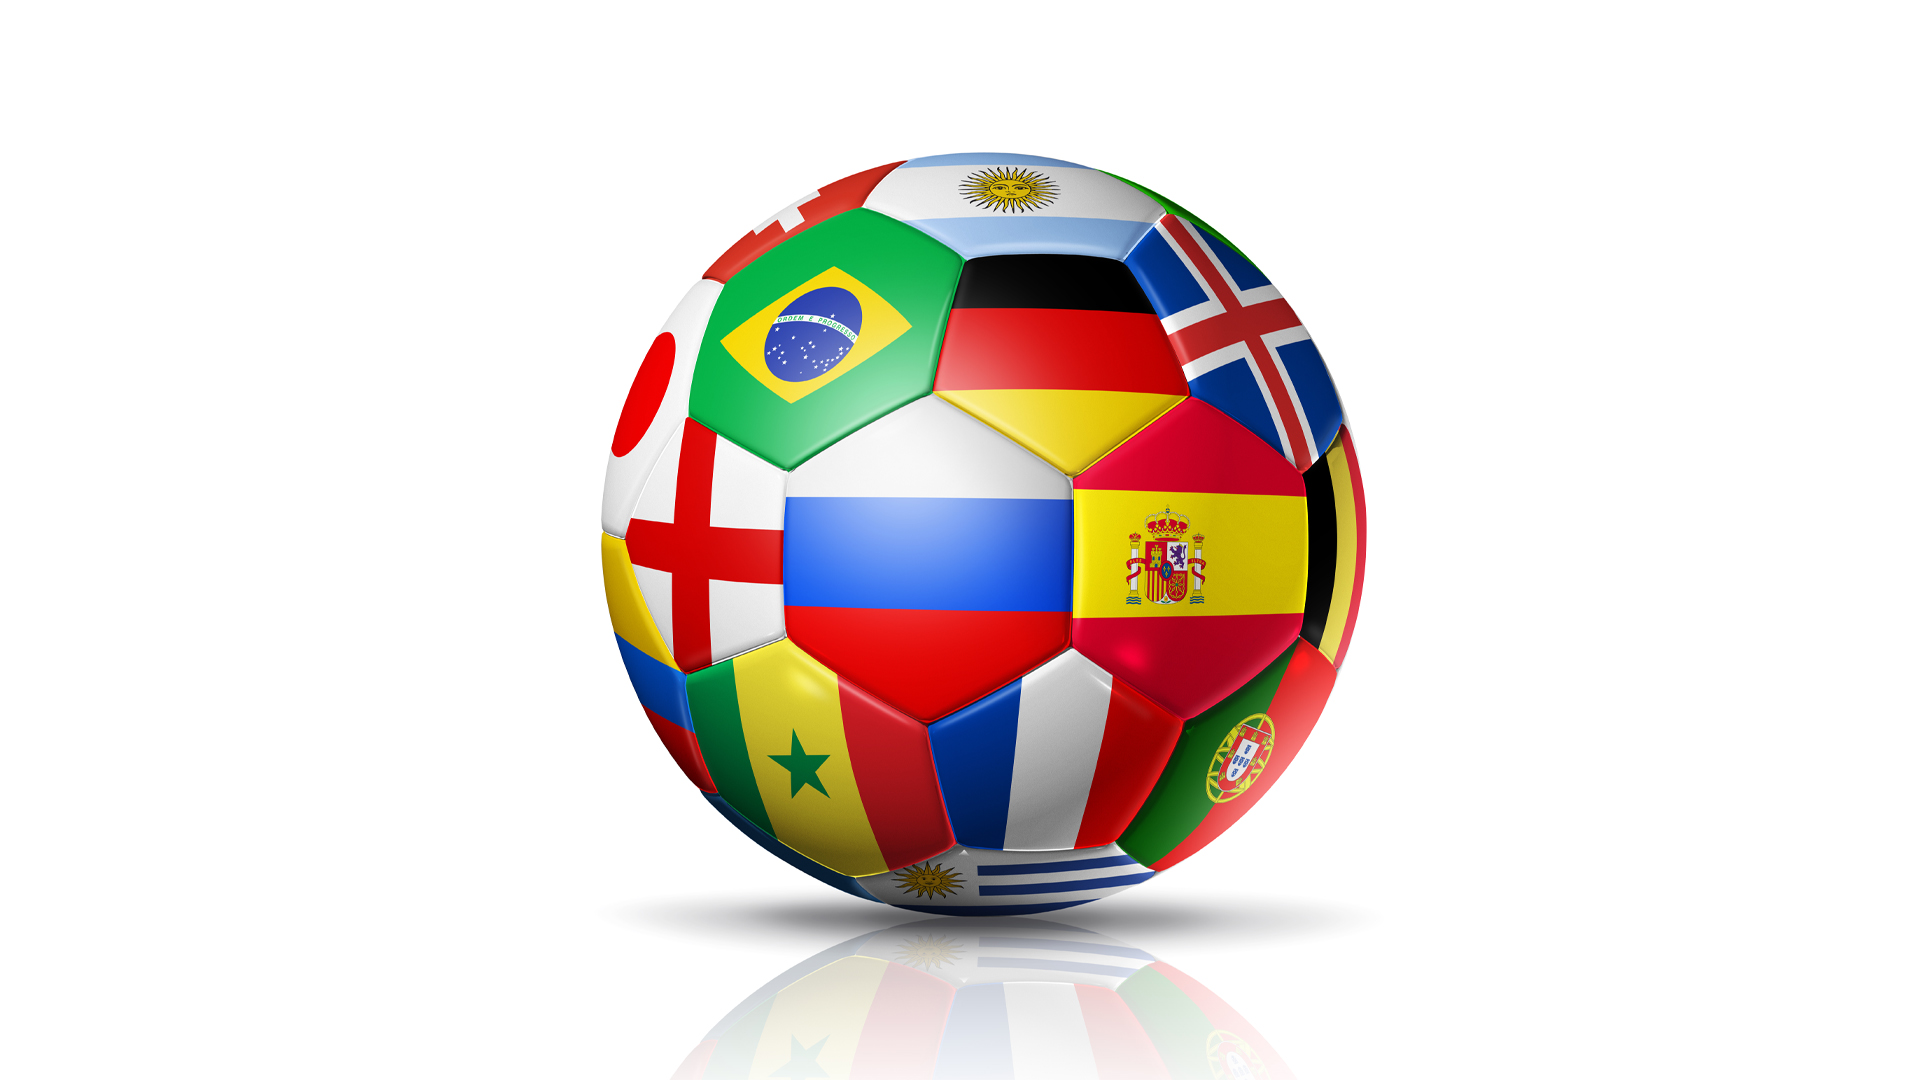 A football decorated with lots of International flags